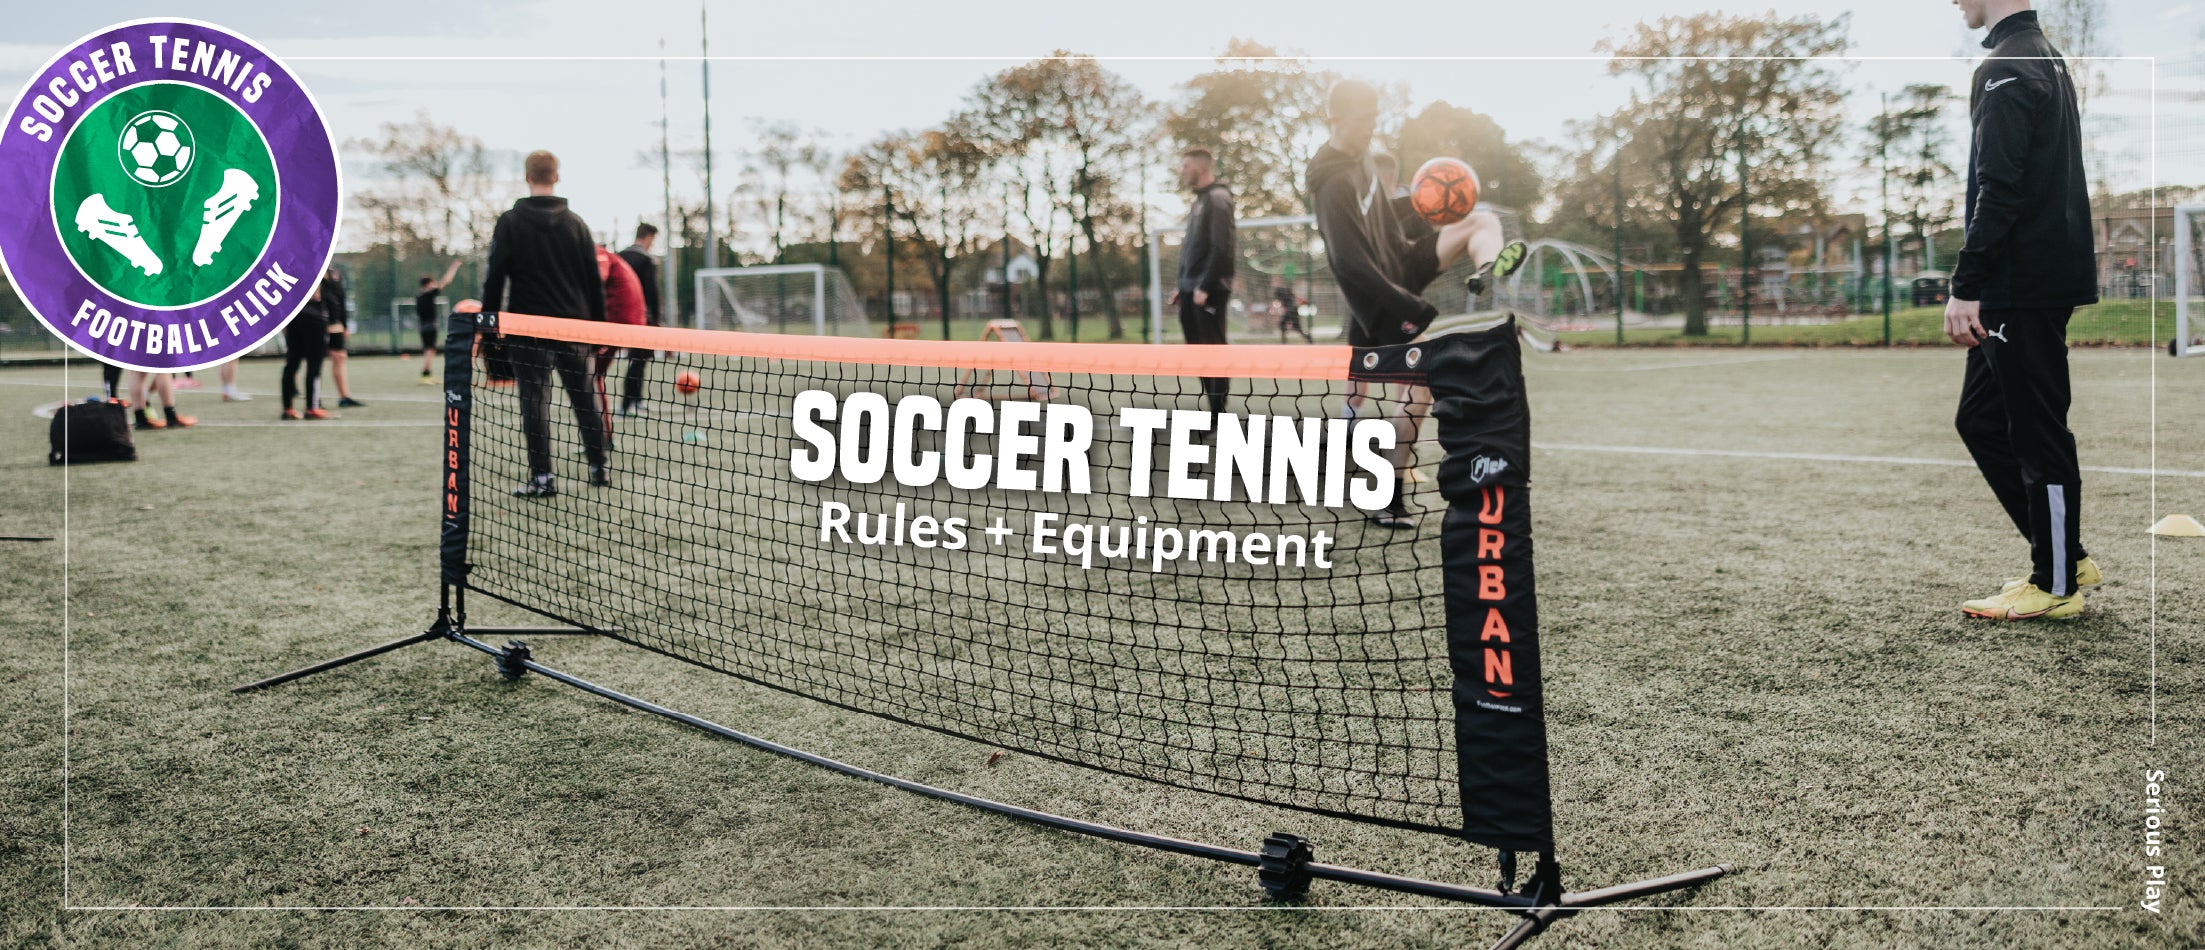 How to play Soccer Tennis (Rules and Equipment to get started)